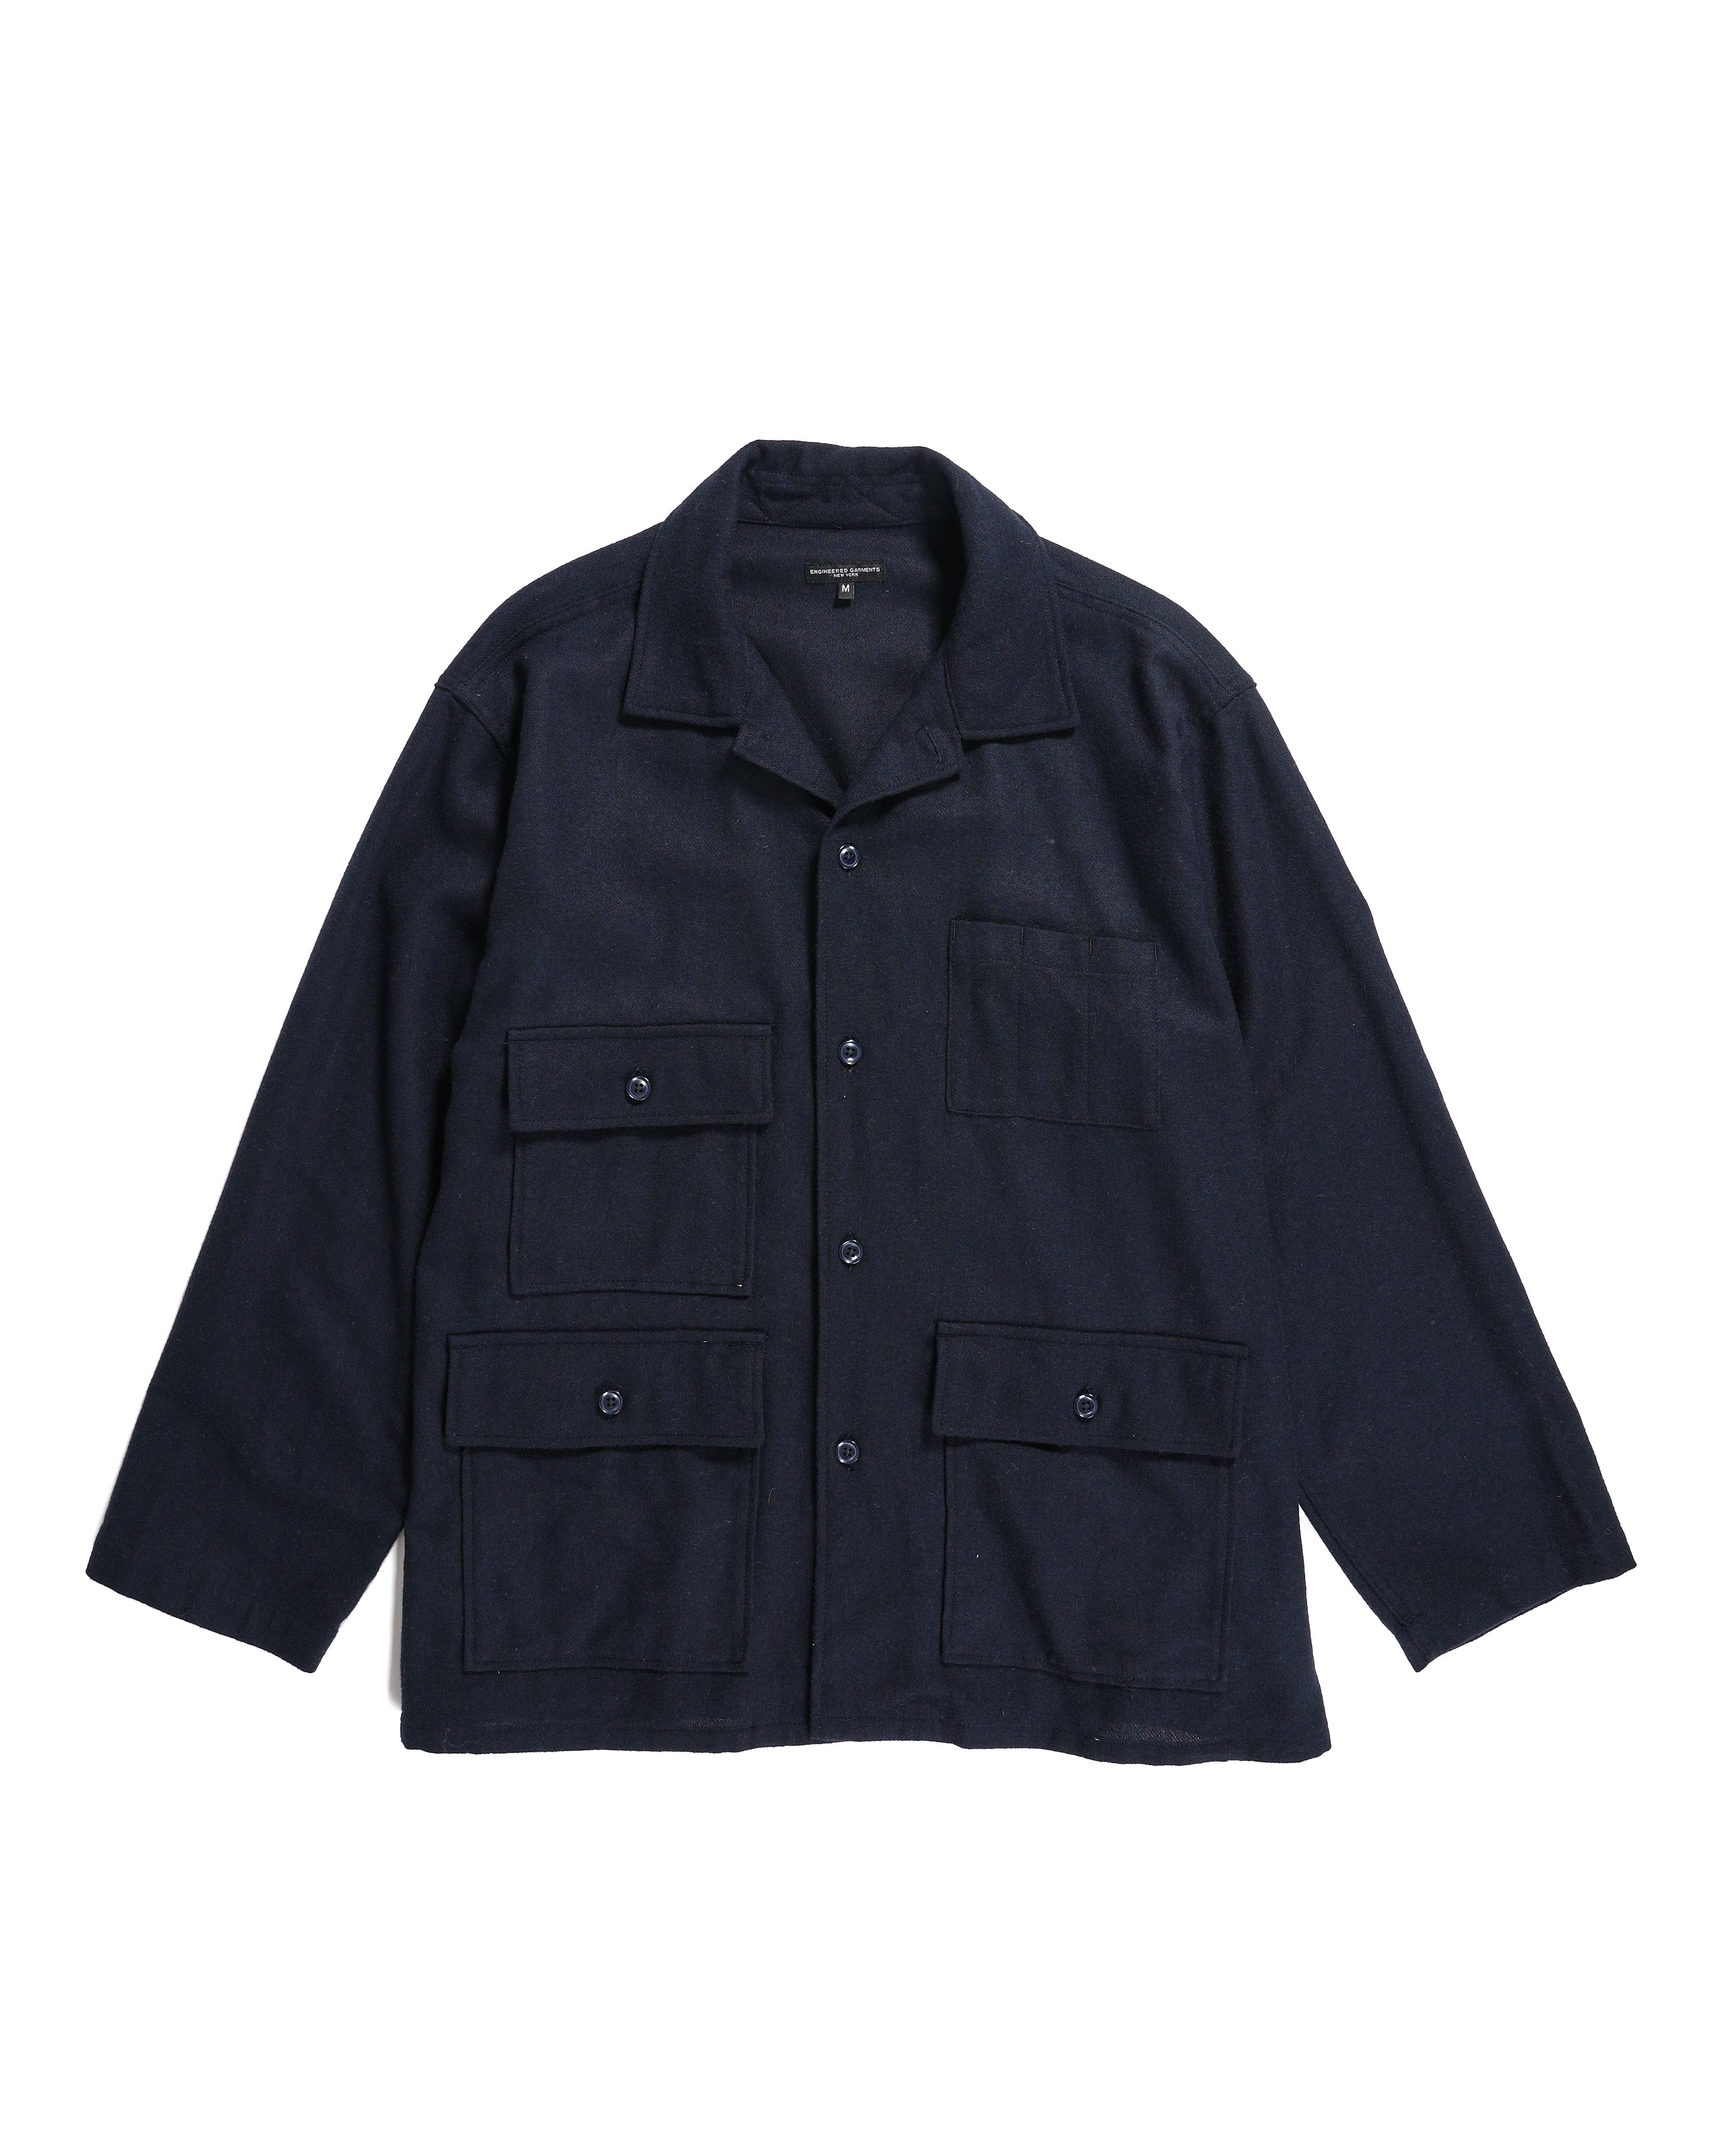 BA Shirt Jacket - Navy Solid Poly Wool Flannel